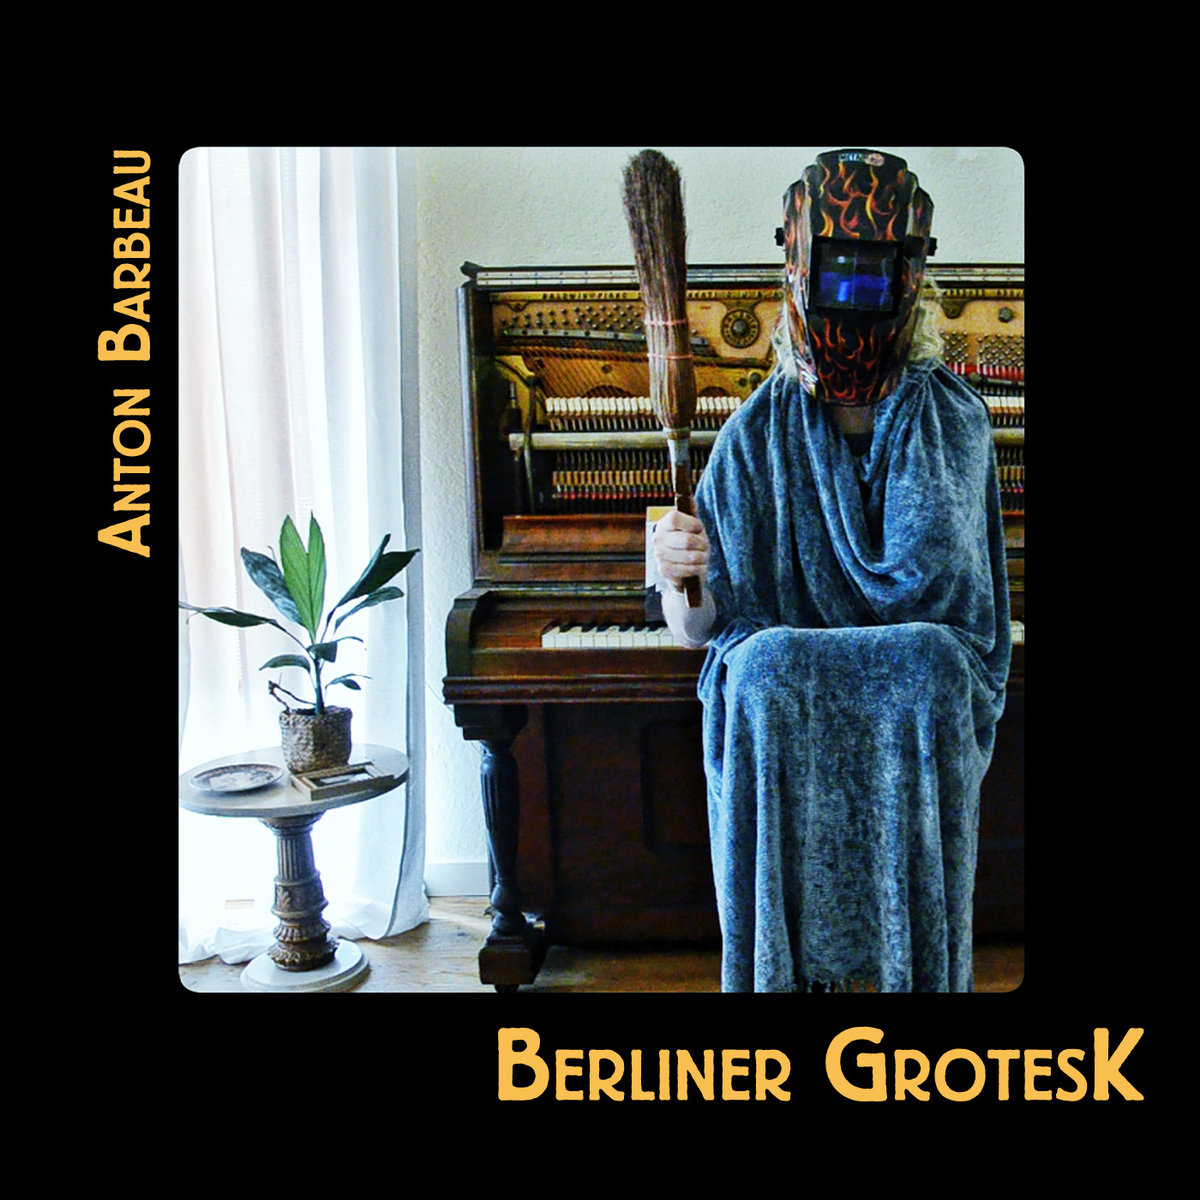 Stereo Embers’ TRACK OF THE DAY: Anton Barbeau’s “Berliner Grotesk”